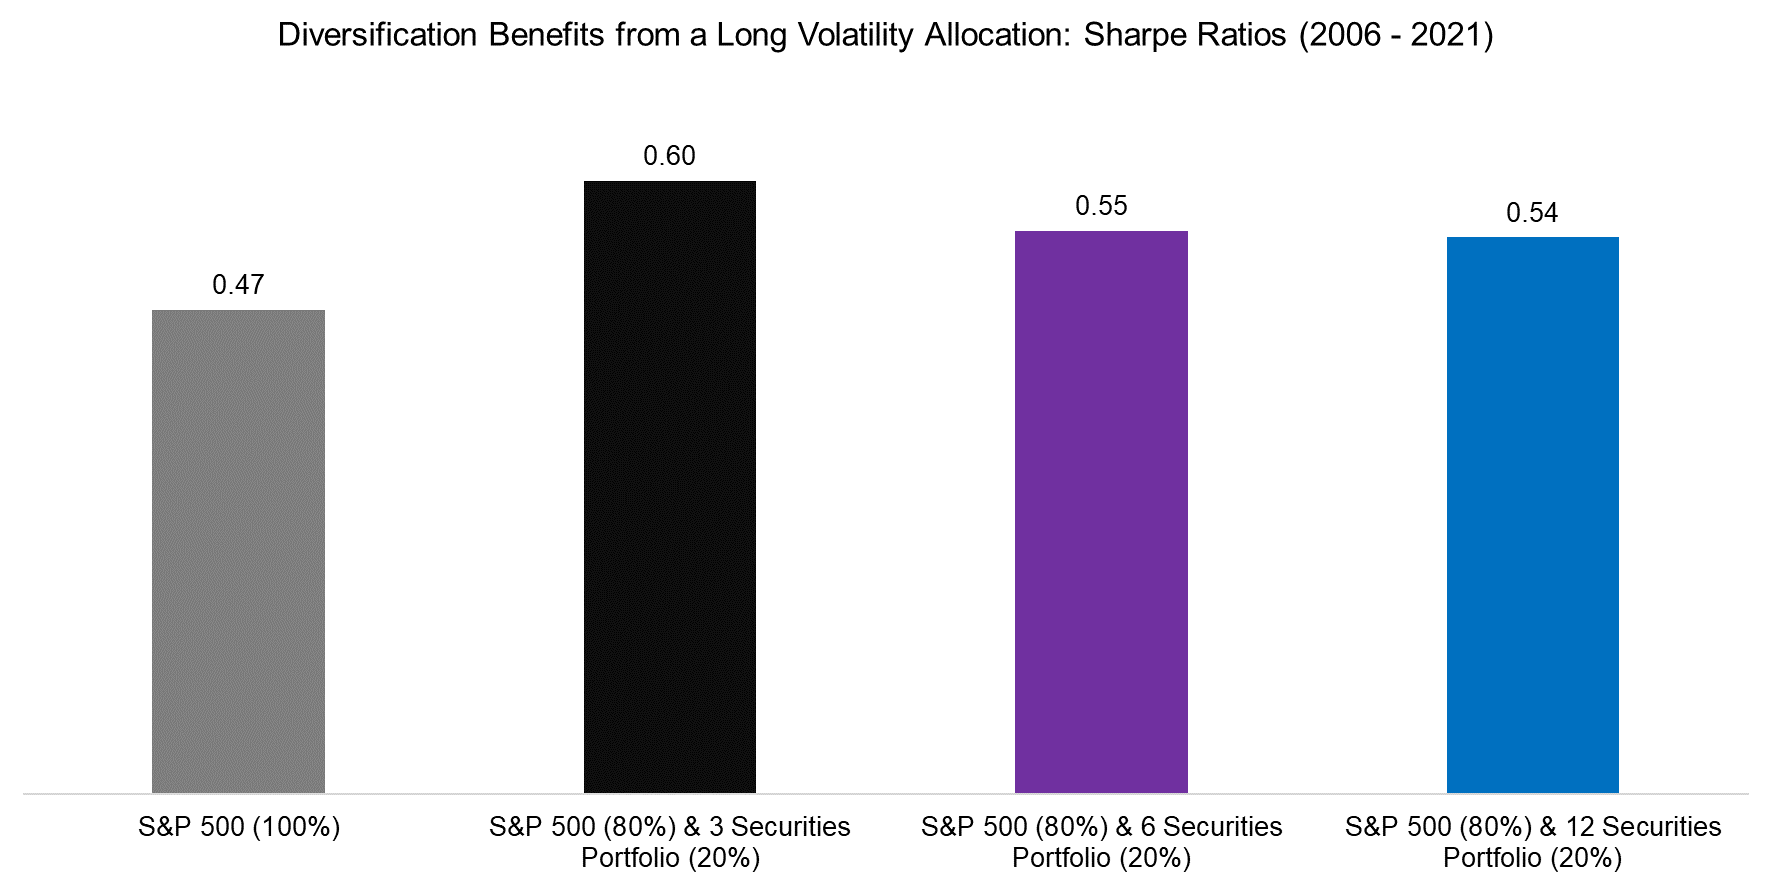 Diversification Benefits from a Long Volatility Allocation Sharpe Ratios (2006 - 2021)